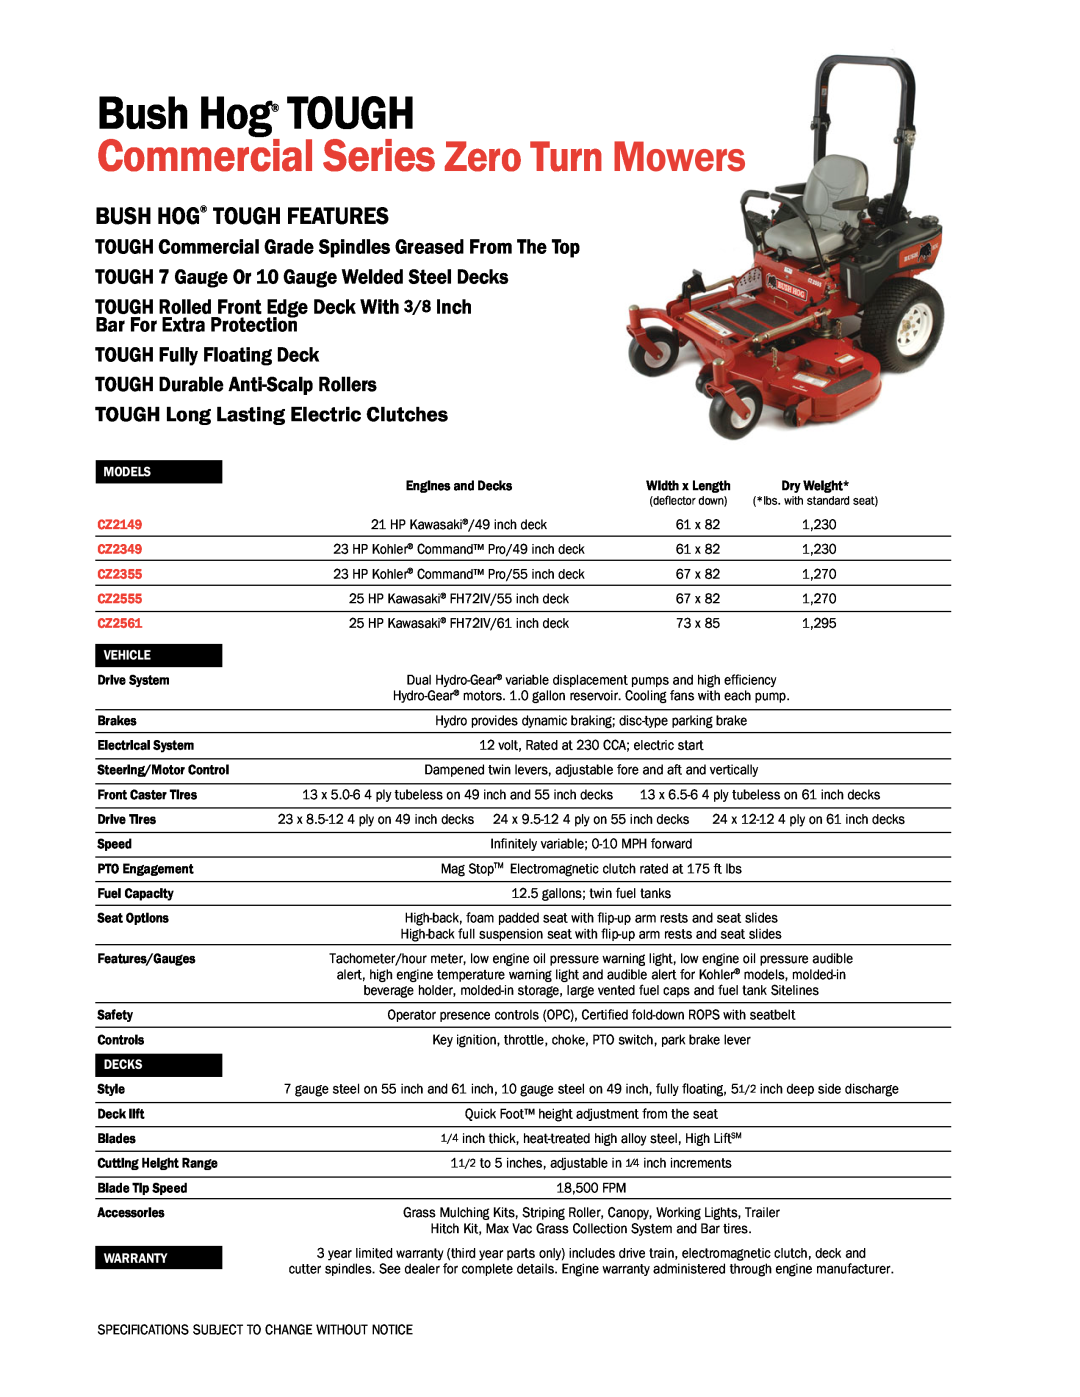 Bush Hog CZ2149 specifications Commercial Series Zero Turn Mowers, Bush Hog TOUGH Features, Bar For Extra Protection 